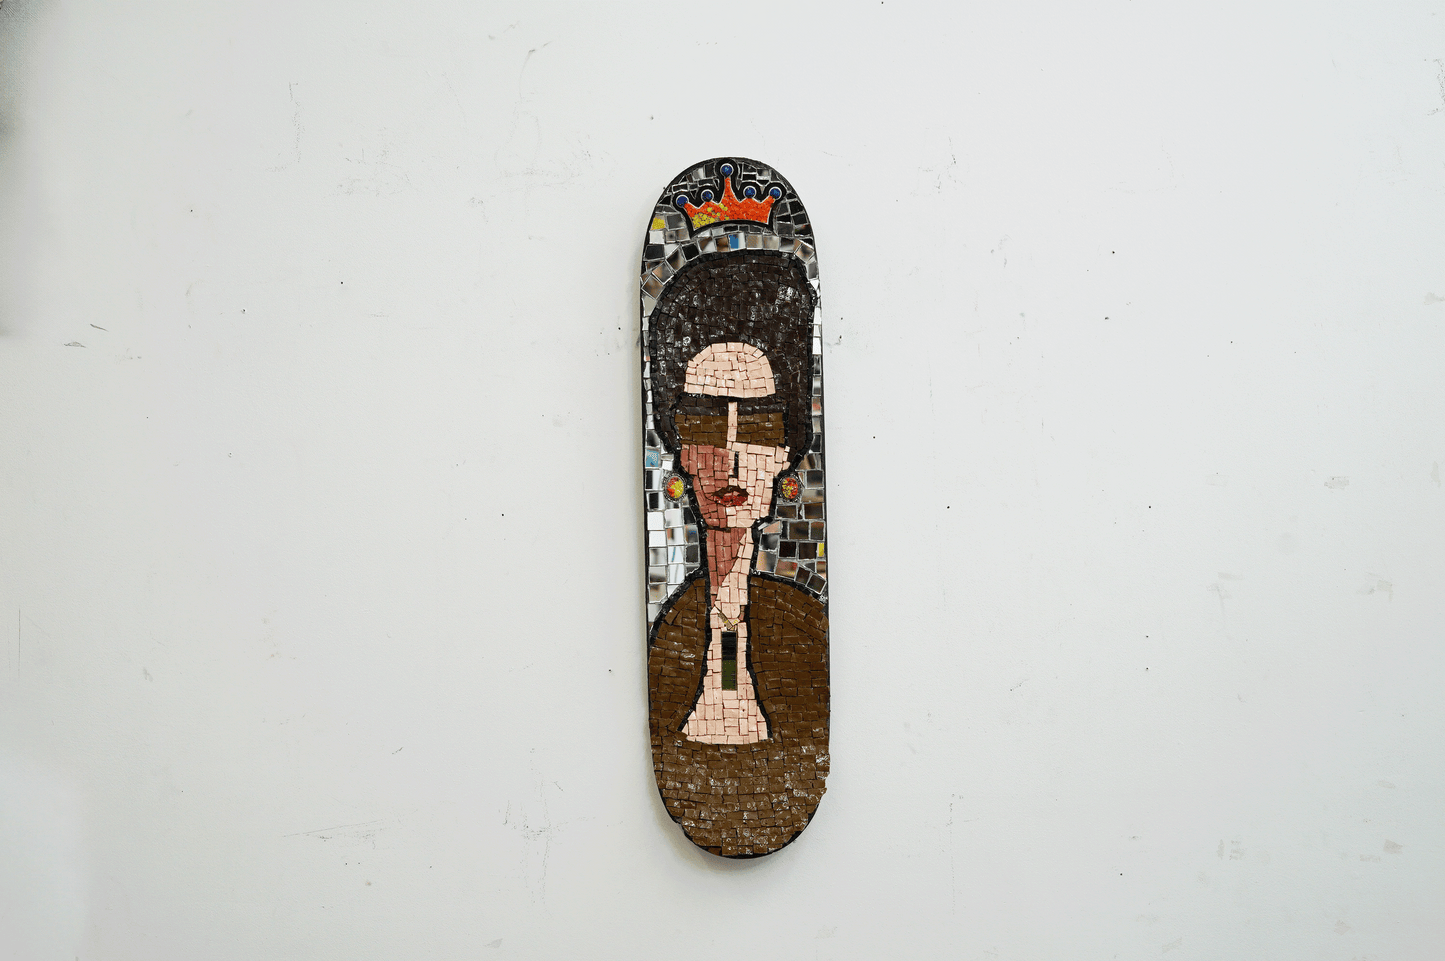 mosaic on a skateboard of a sophisticated woman with jewelry , big hair and sunglasses